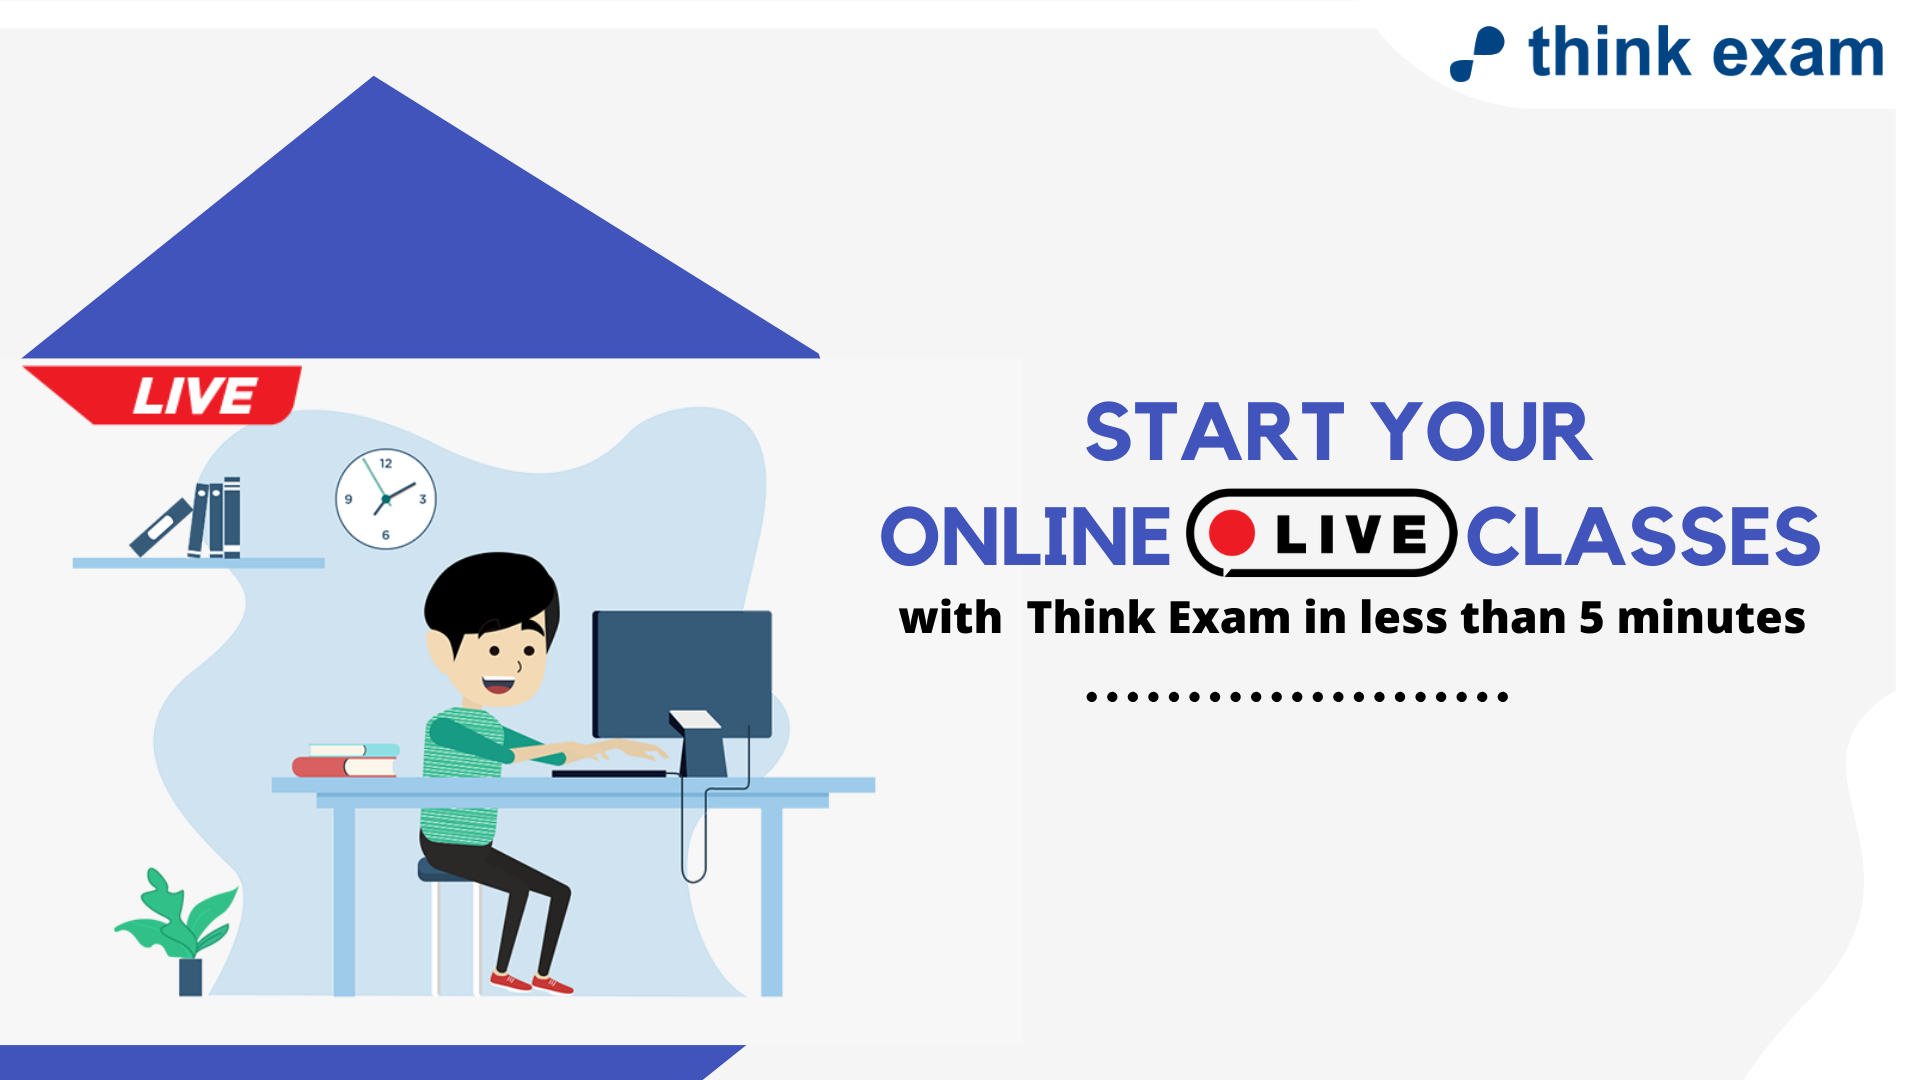 Start your online live classes